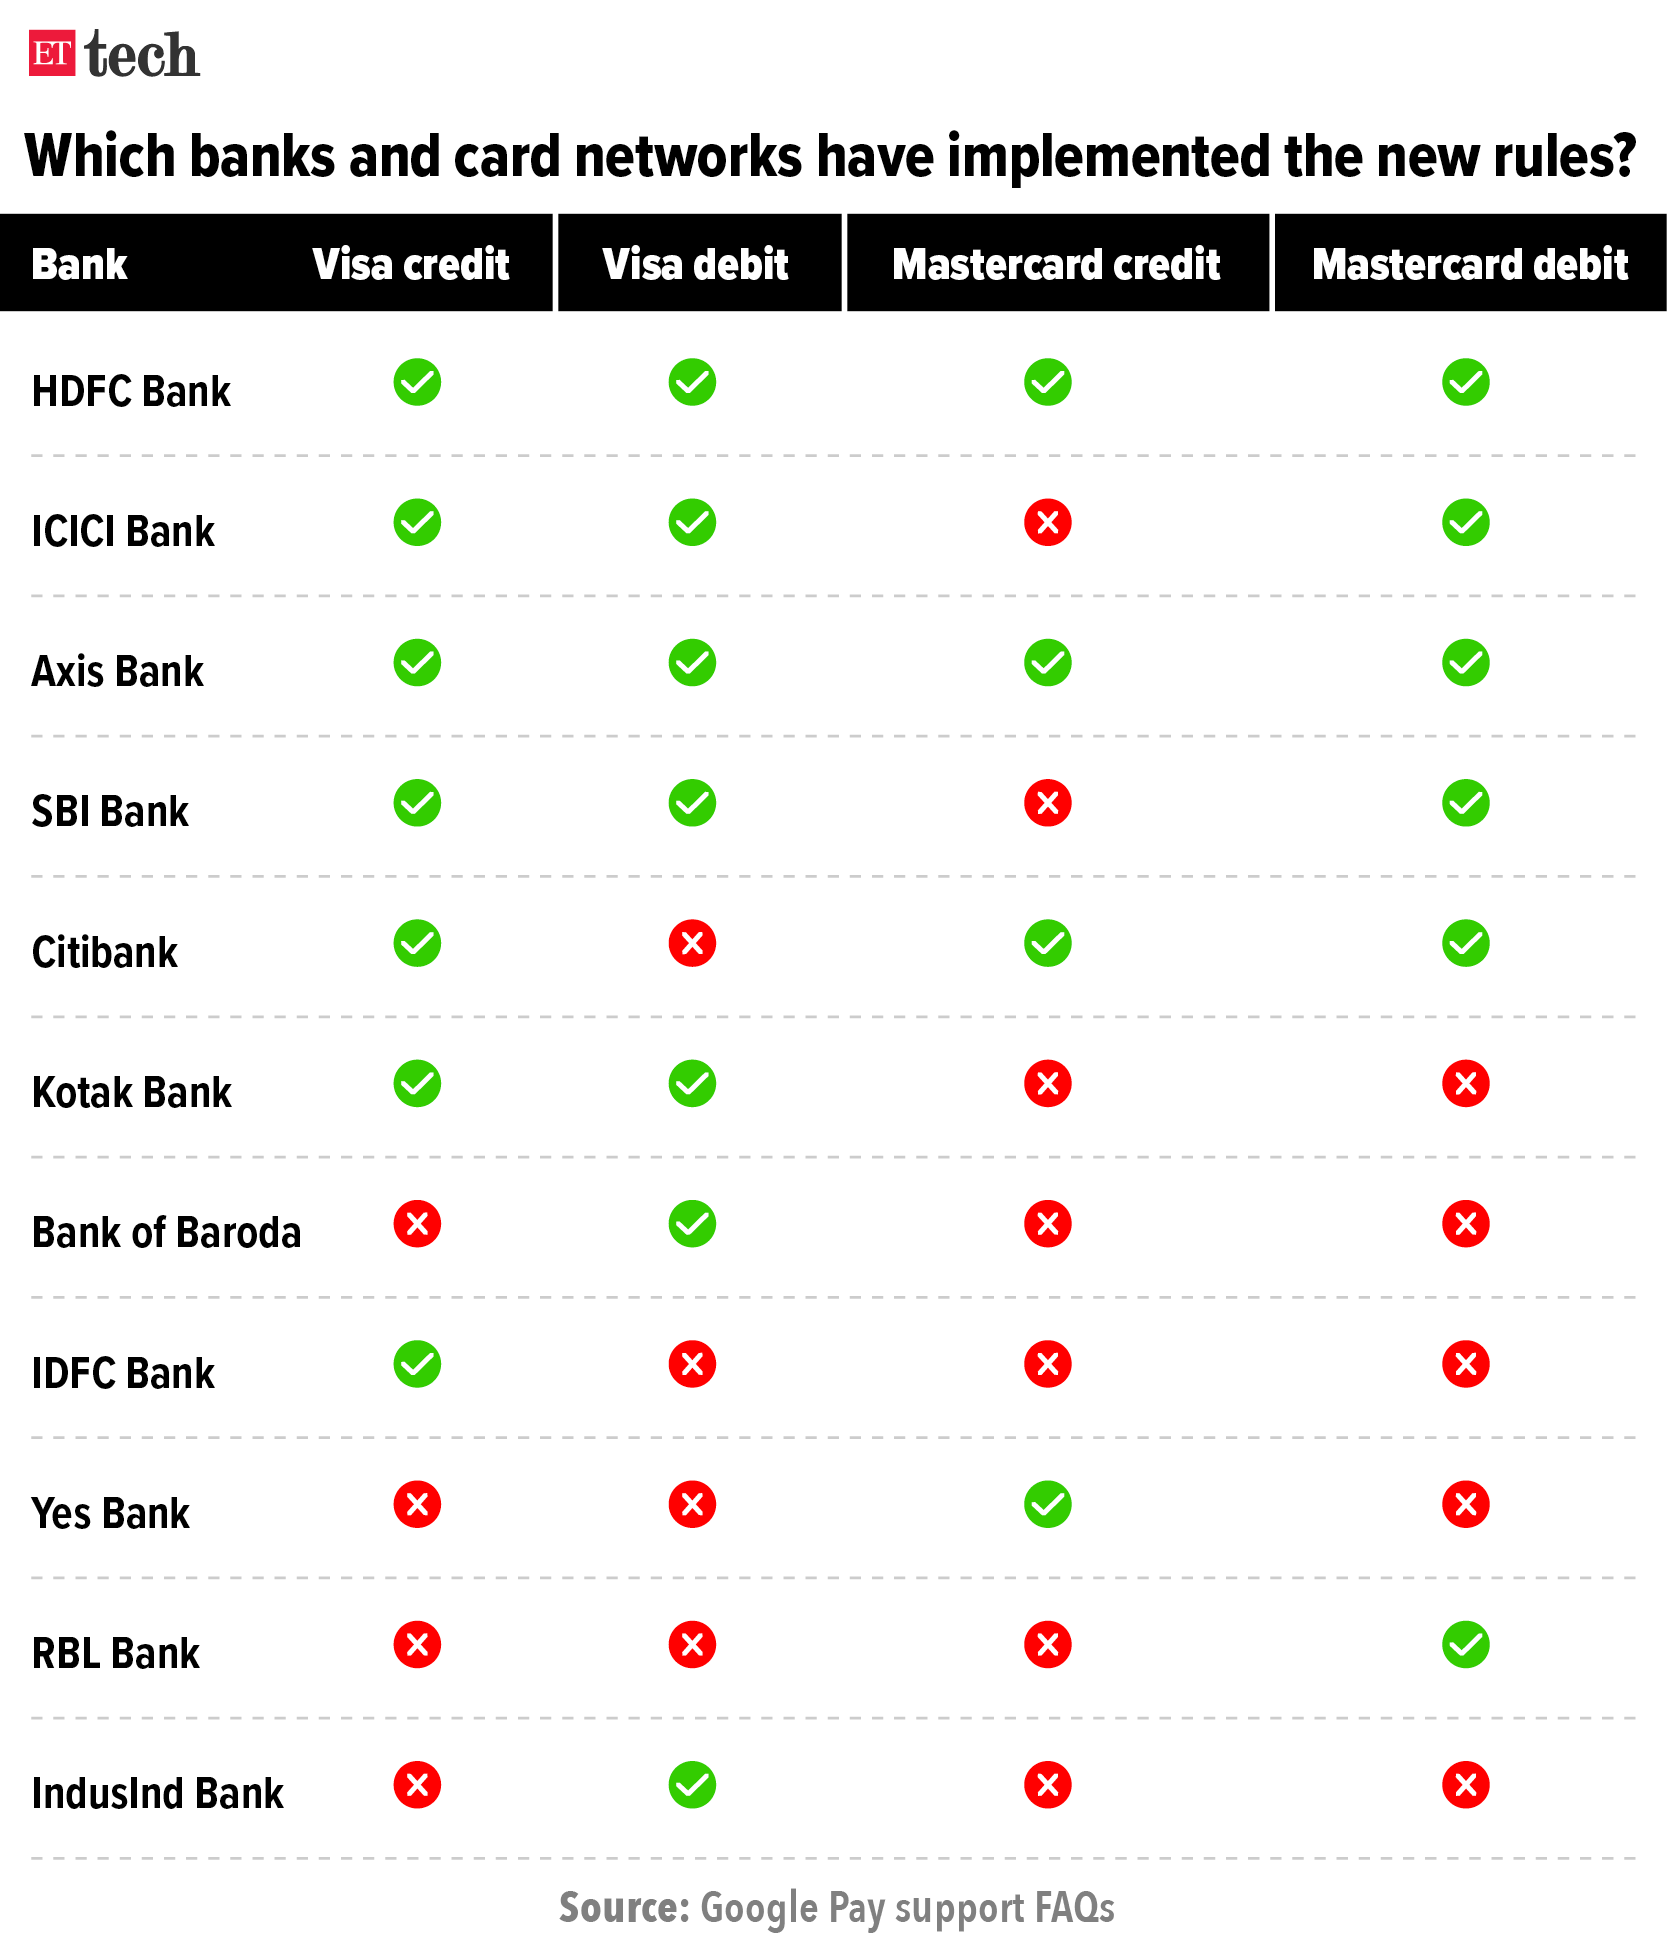 Which banks and card networks